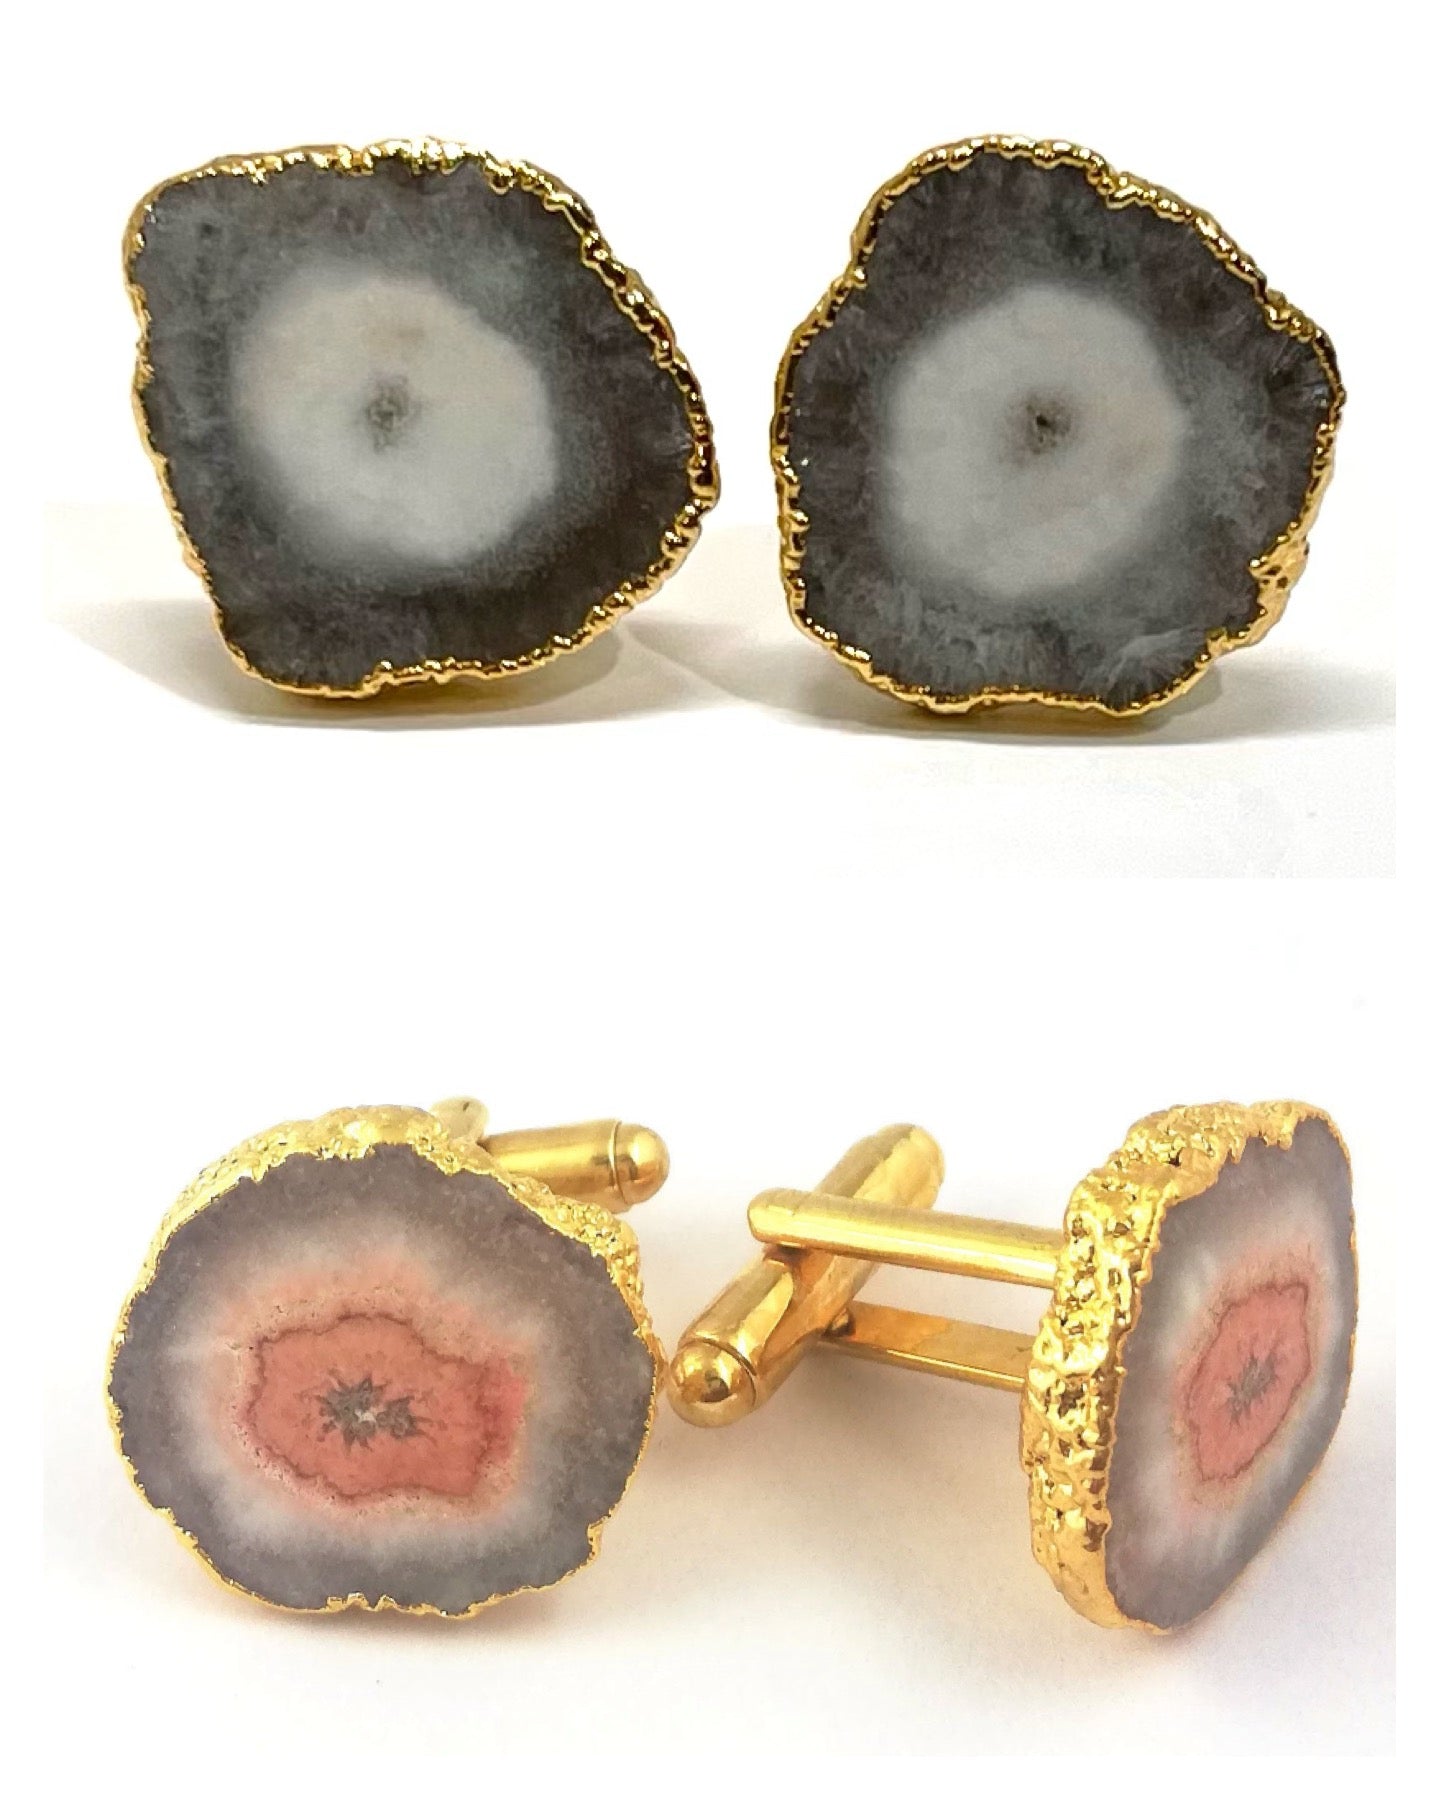 Stylish Earth-Tones Geode 24k Gold Electroplated Cufflinks